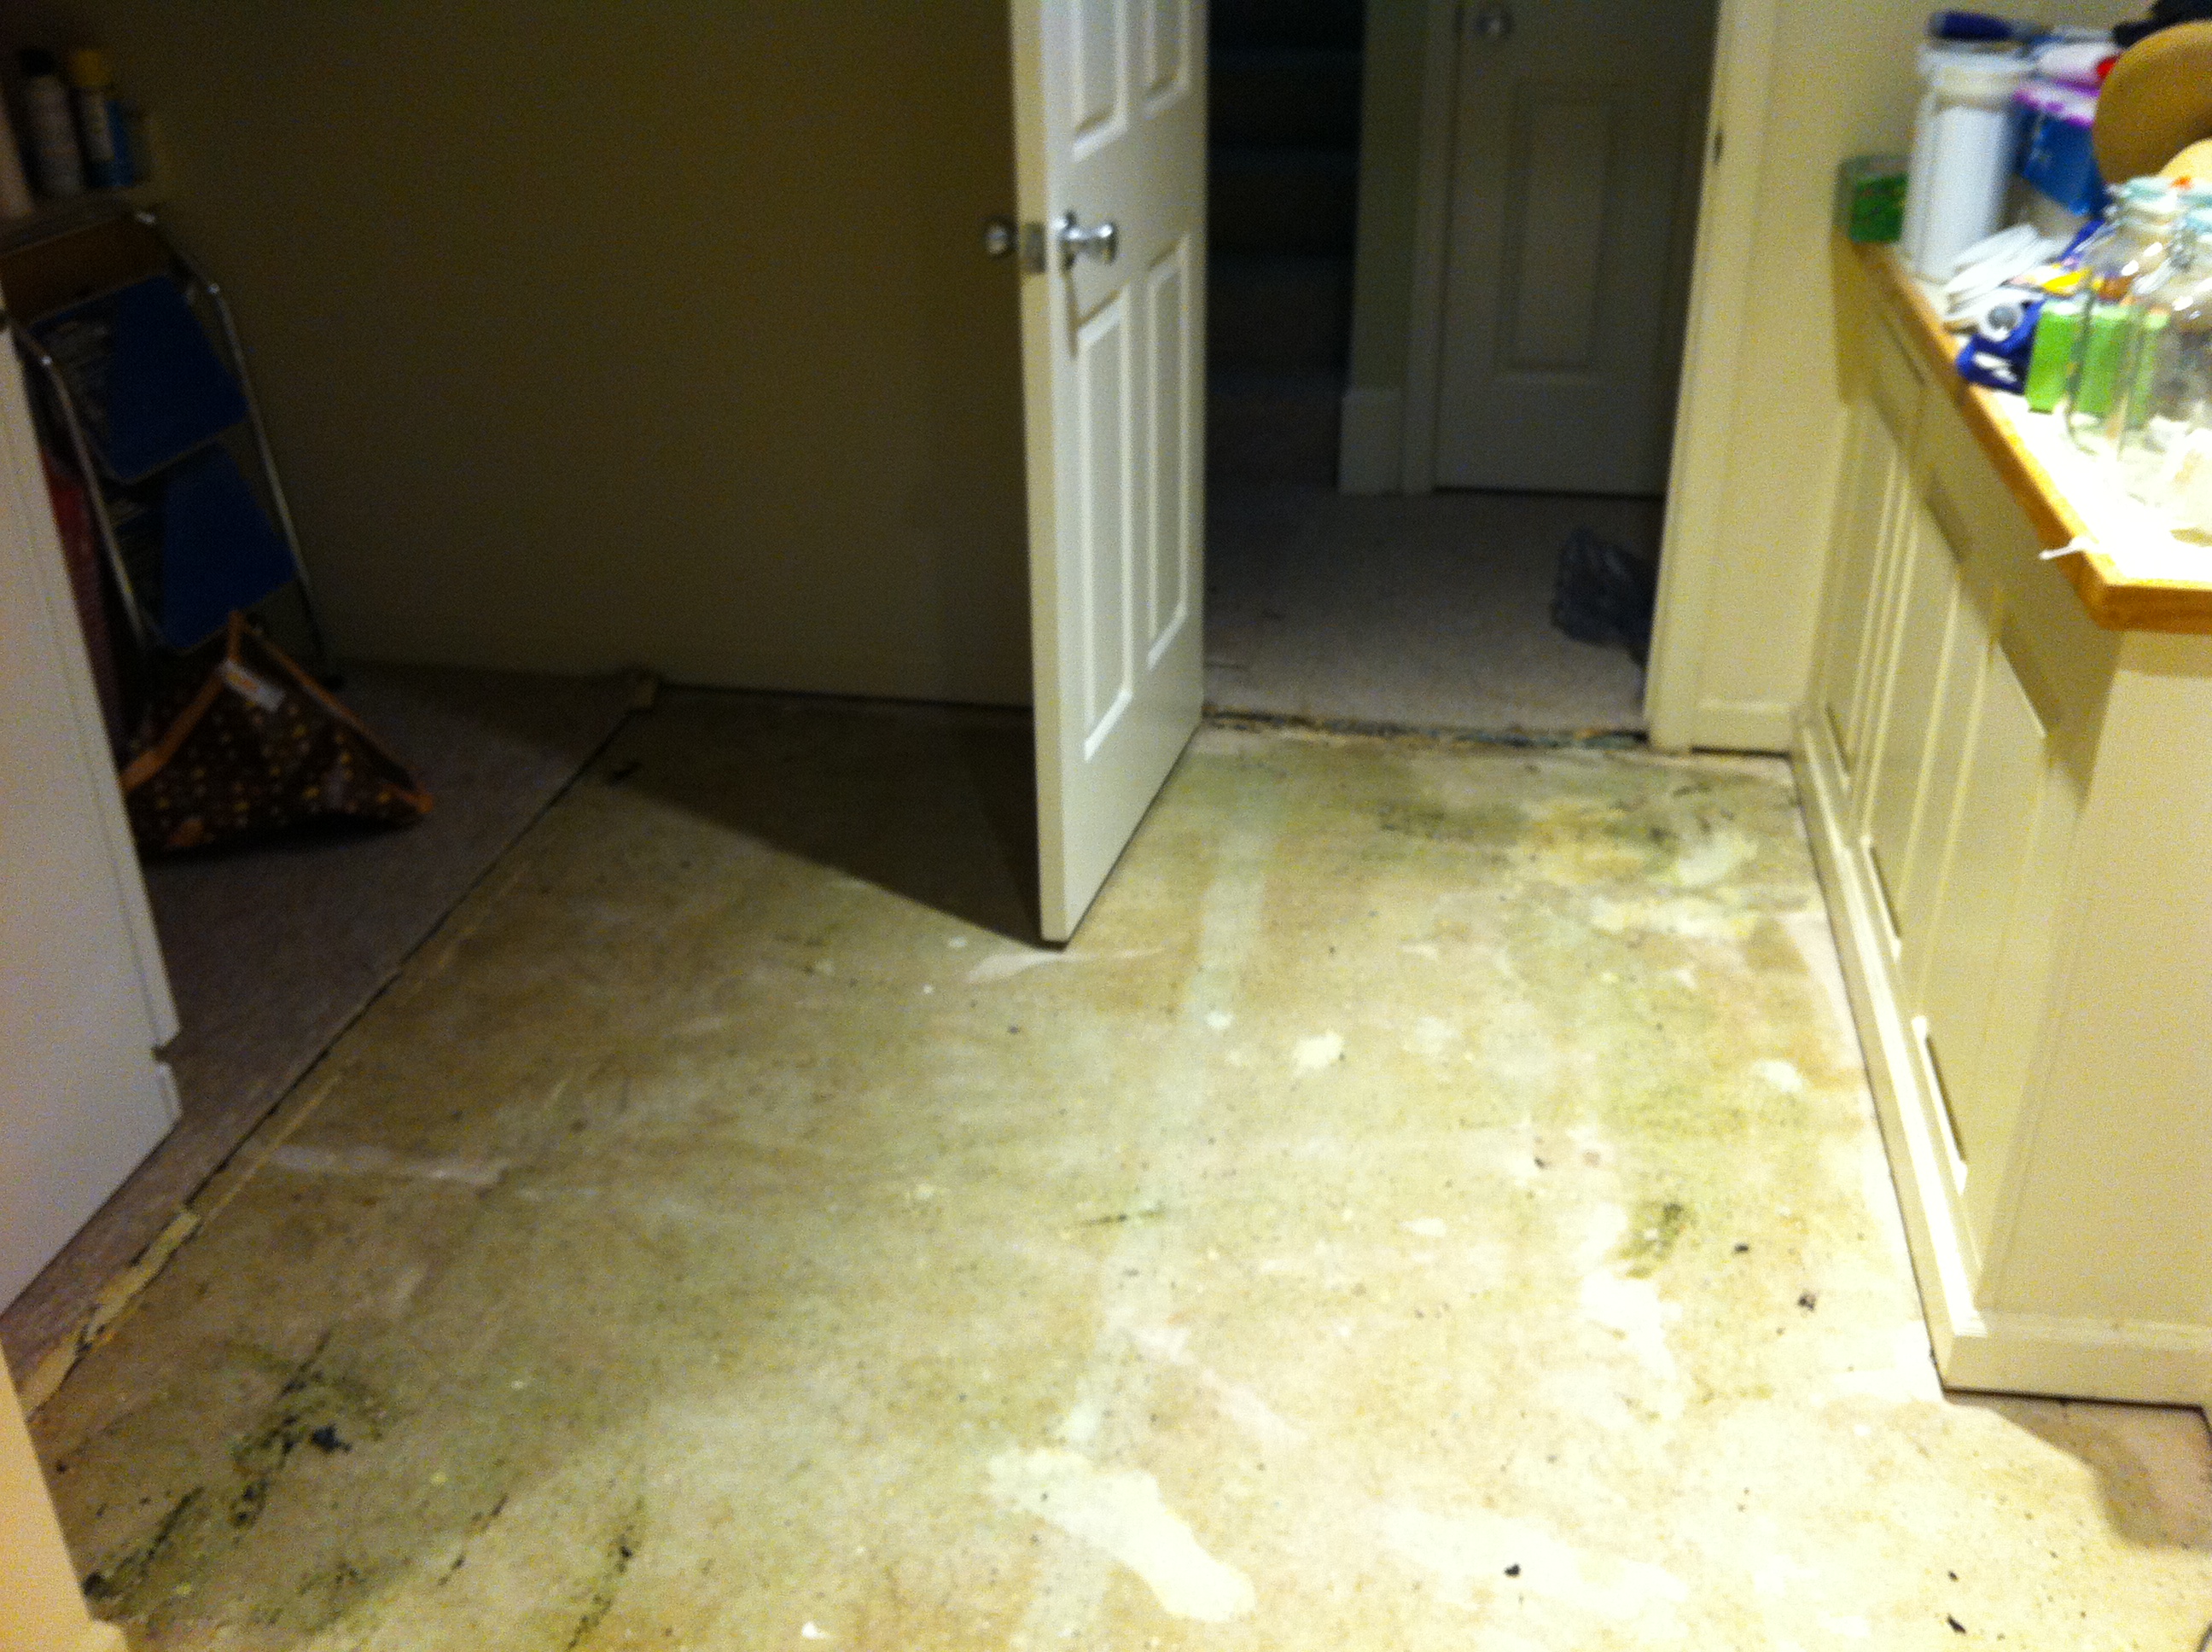 Removed carpet (glue is still there)